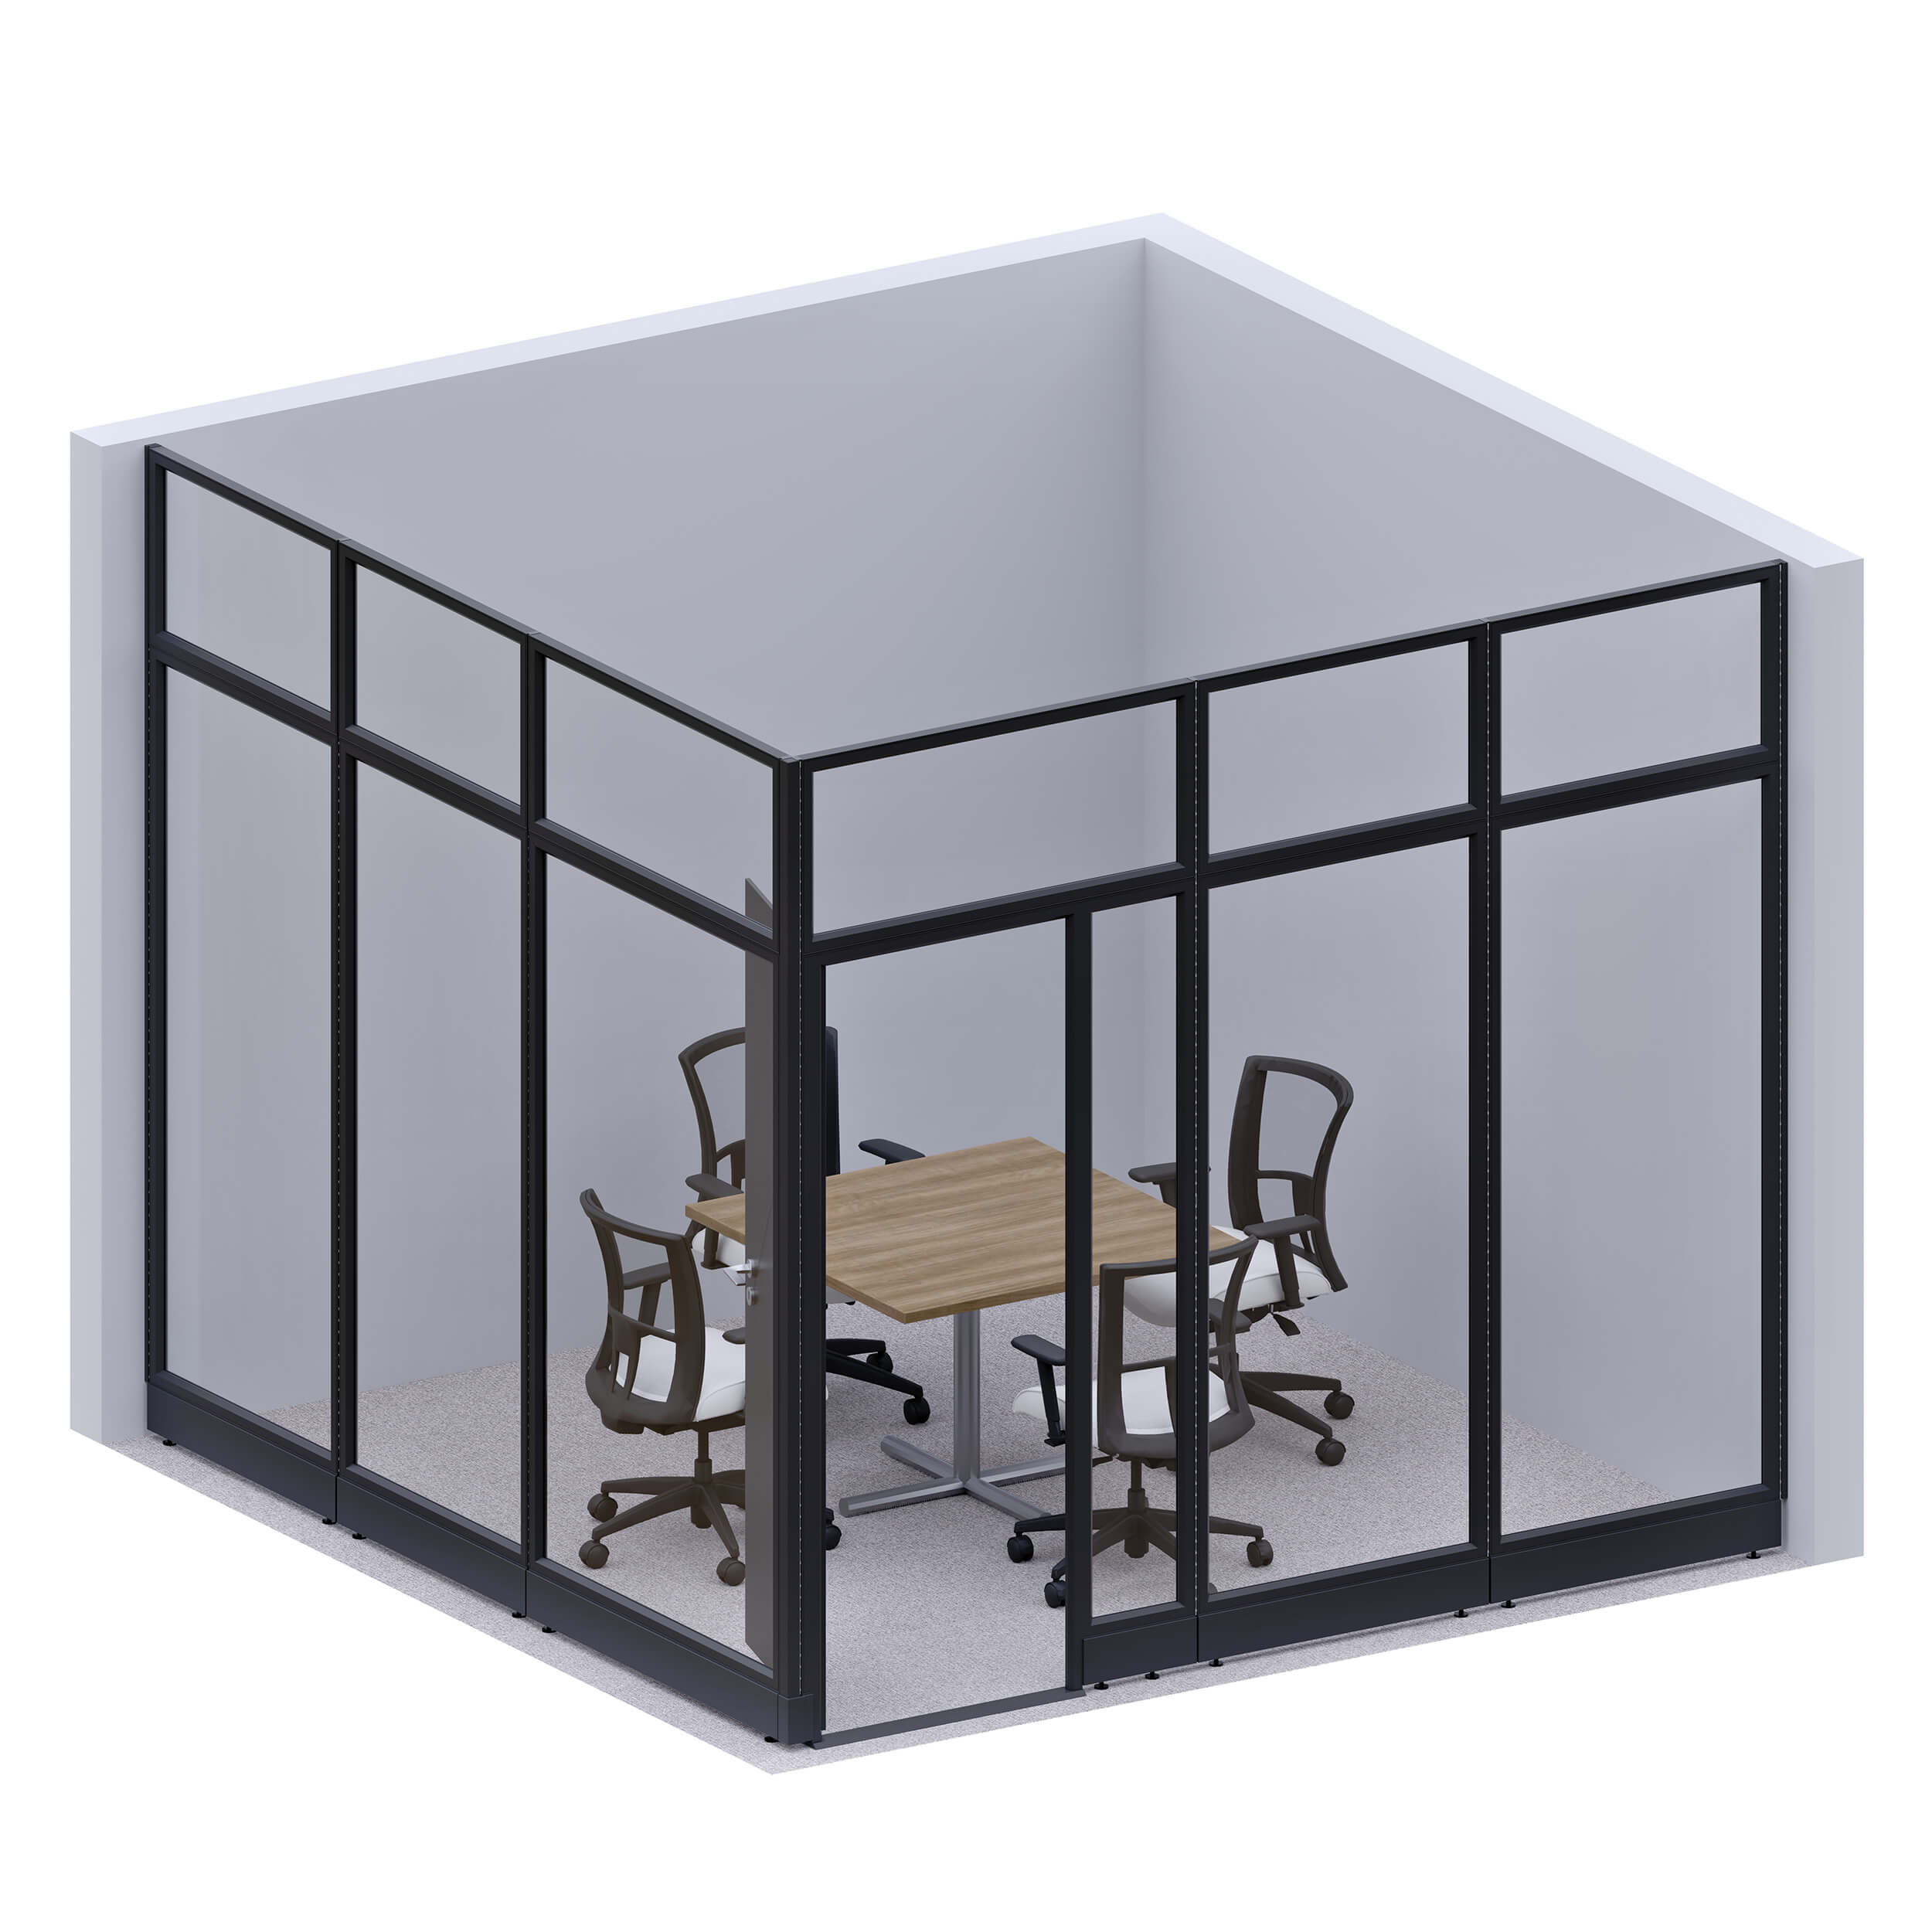 office-walls-glass-wall-conference-room-107h-l-shape.jpg